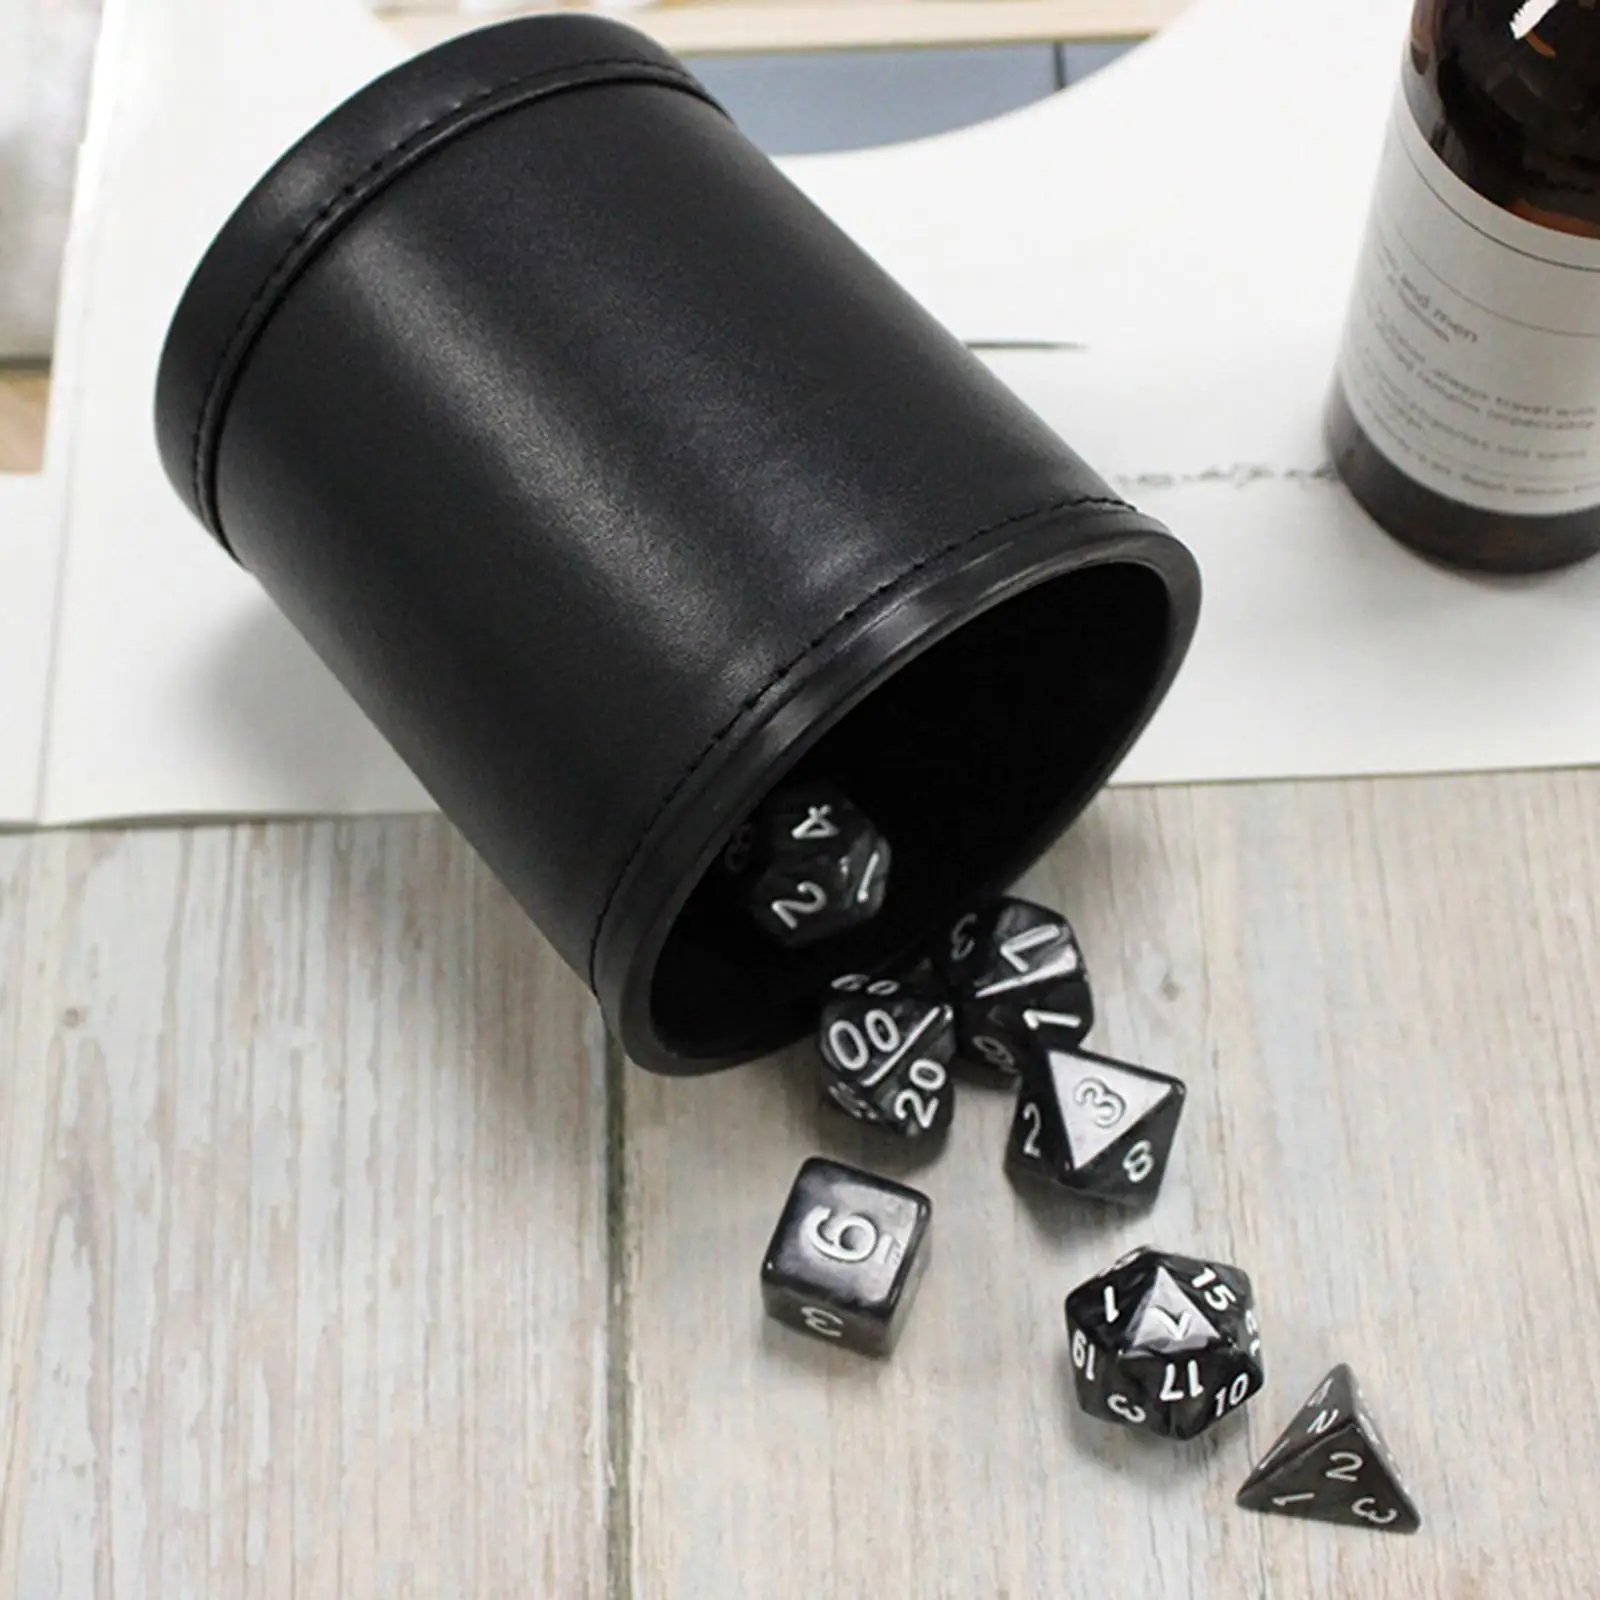 Protable Dice Cup Entertainment Dice Game Accessories Leather for Home Party